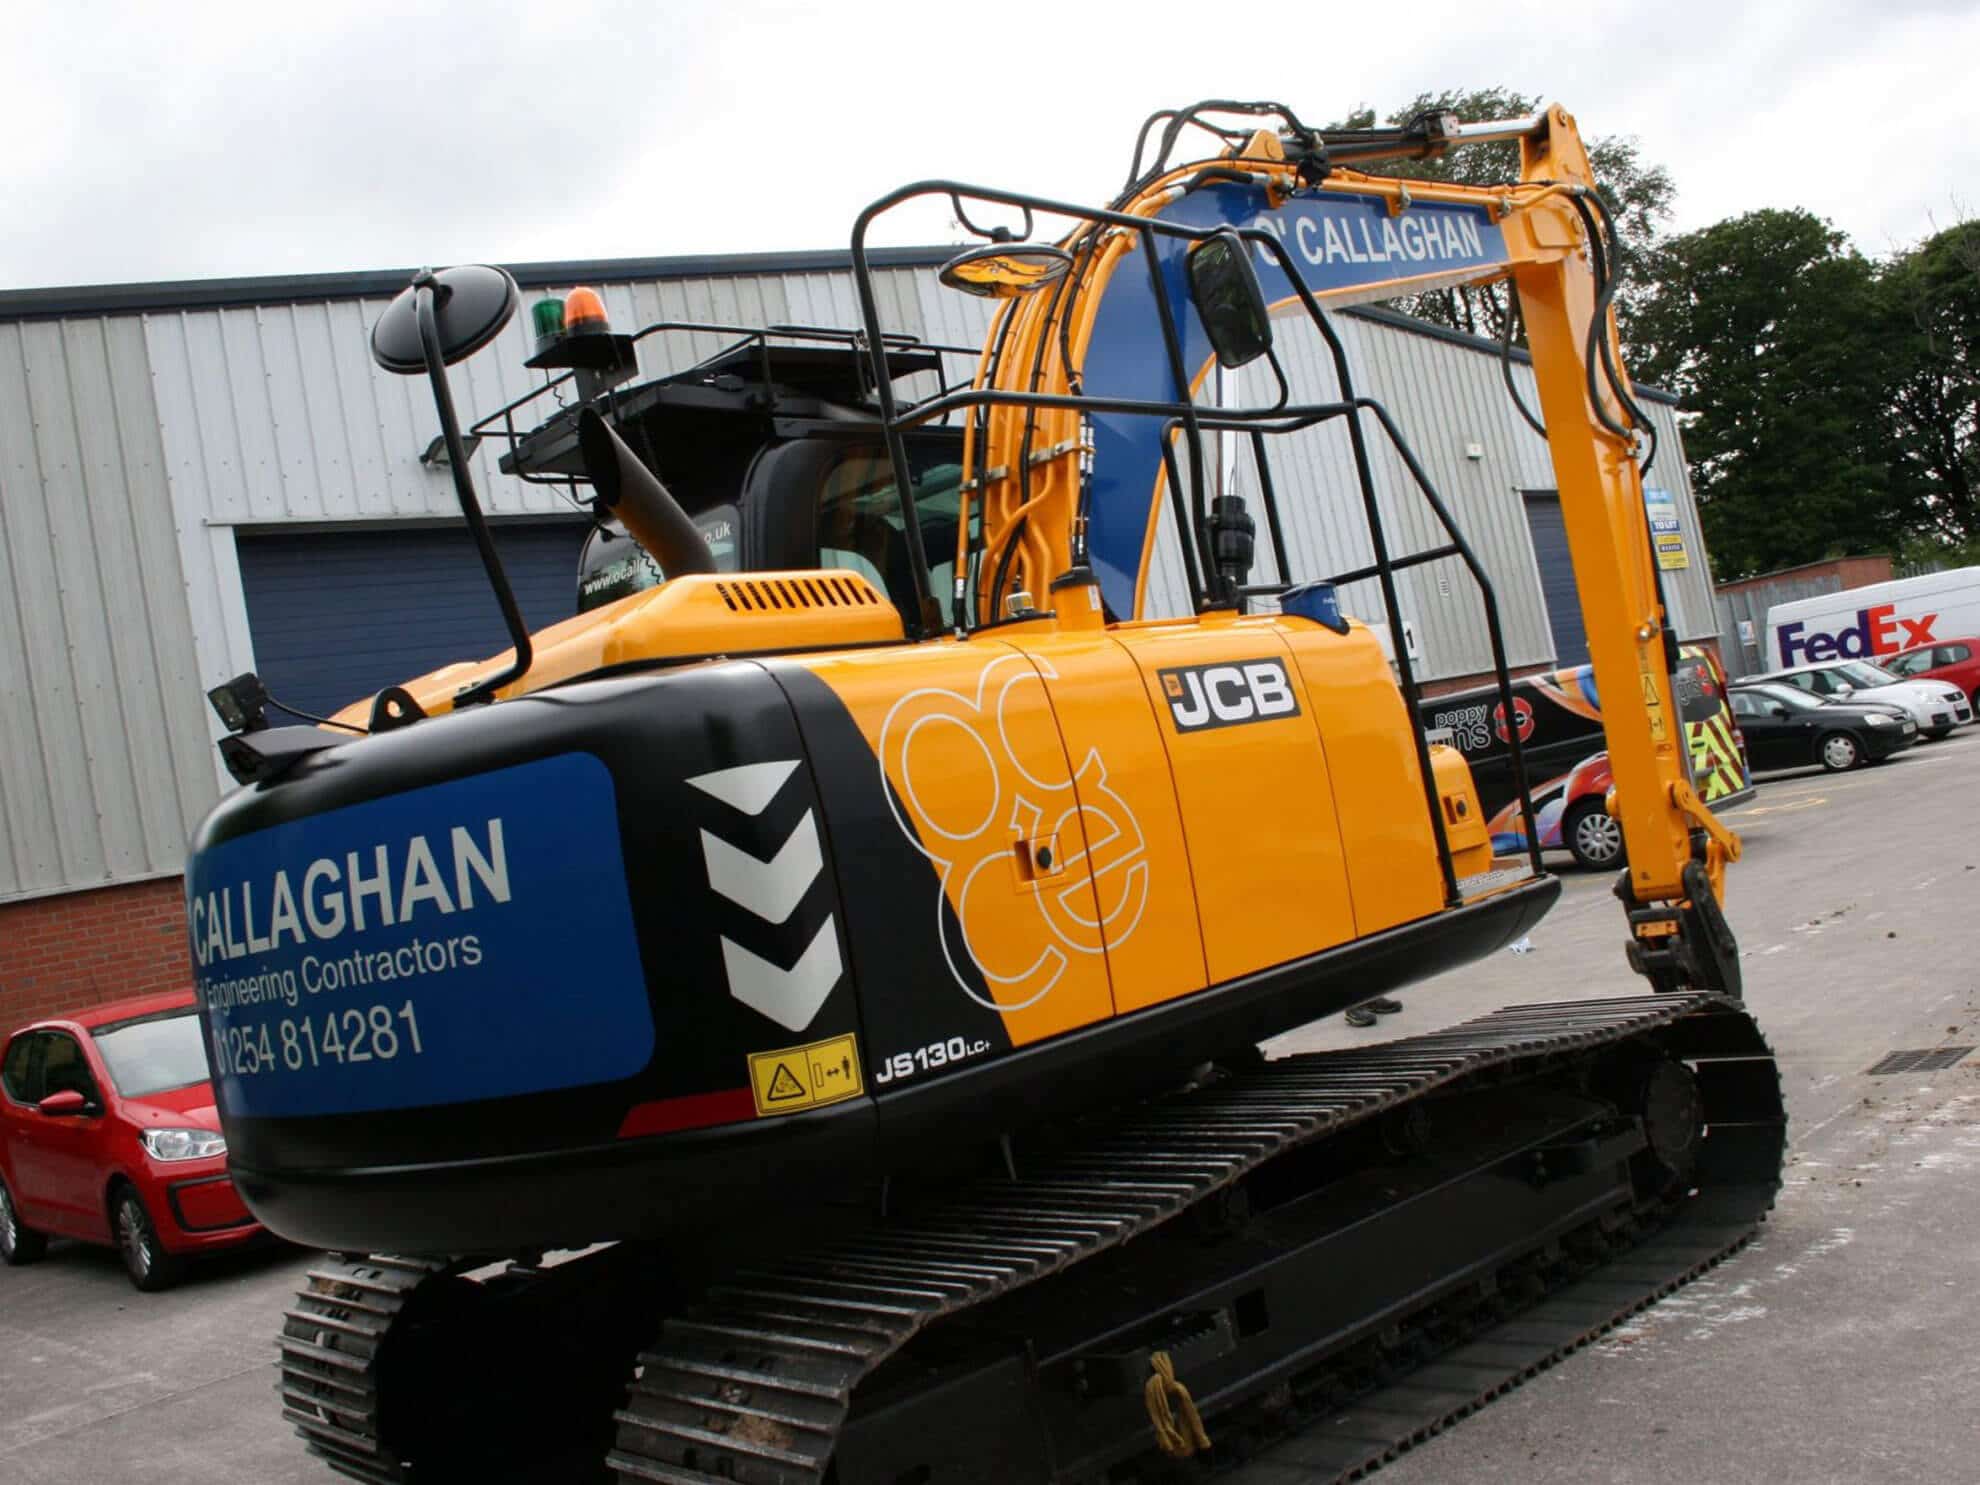 O'Callaghan JCB digger part wrap vehicle graphics and wrapping